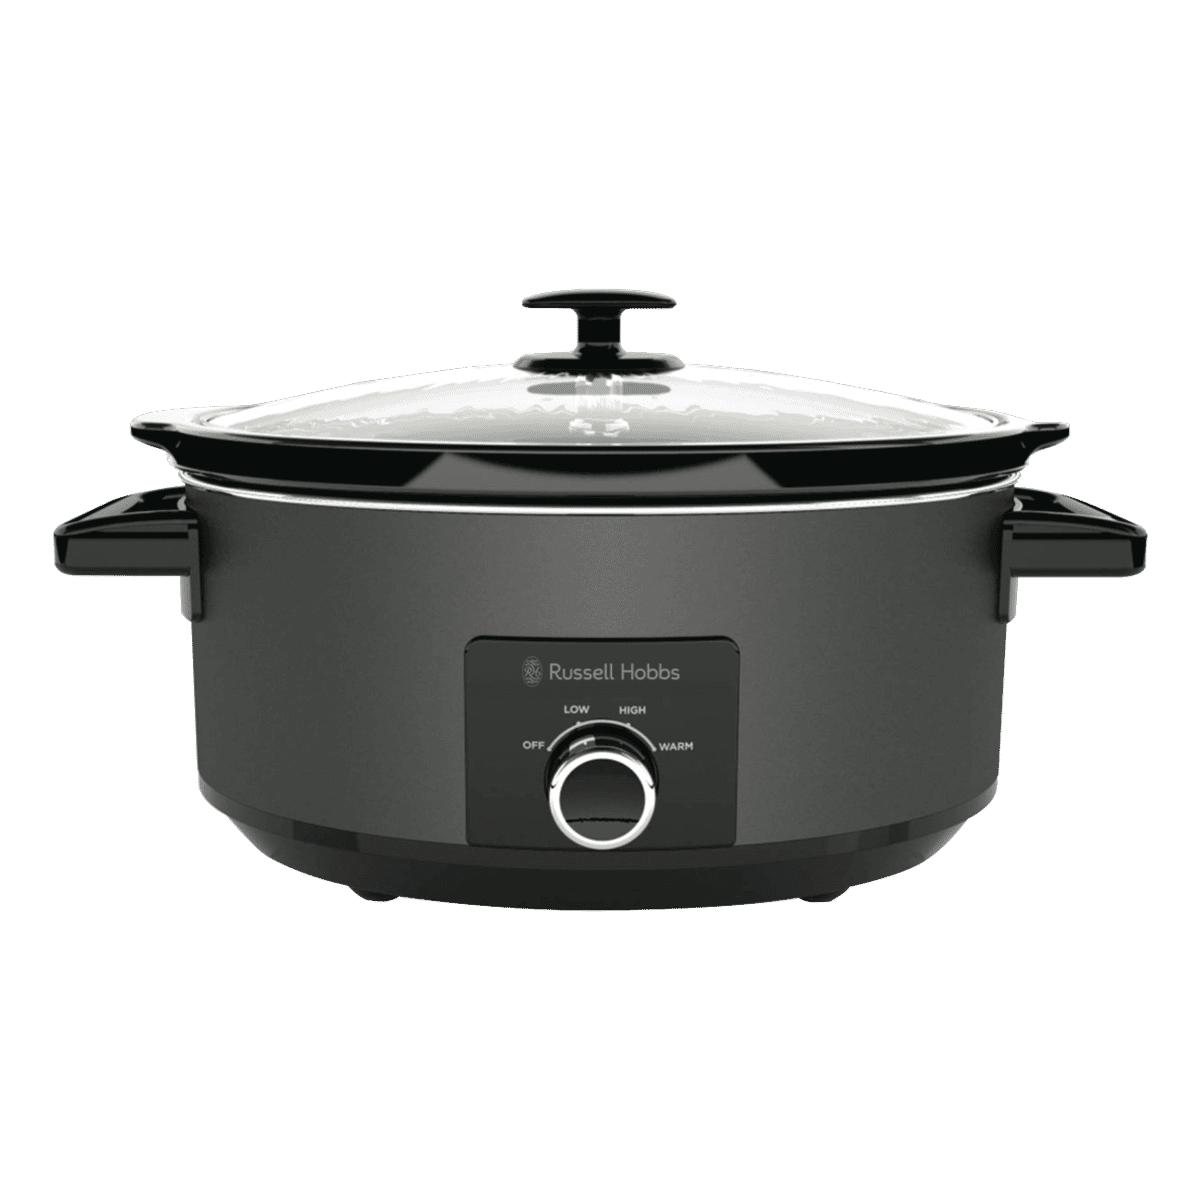 Russell Hobbs RHSC7 7L Slow Cooker - Matte Black at The Good Guys